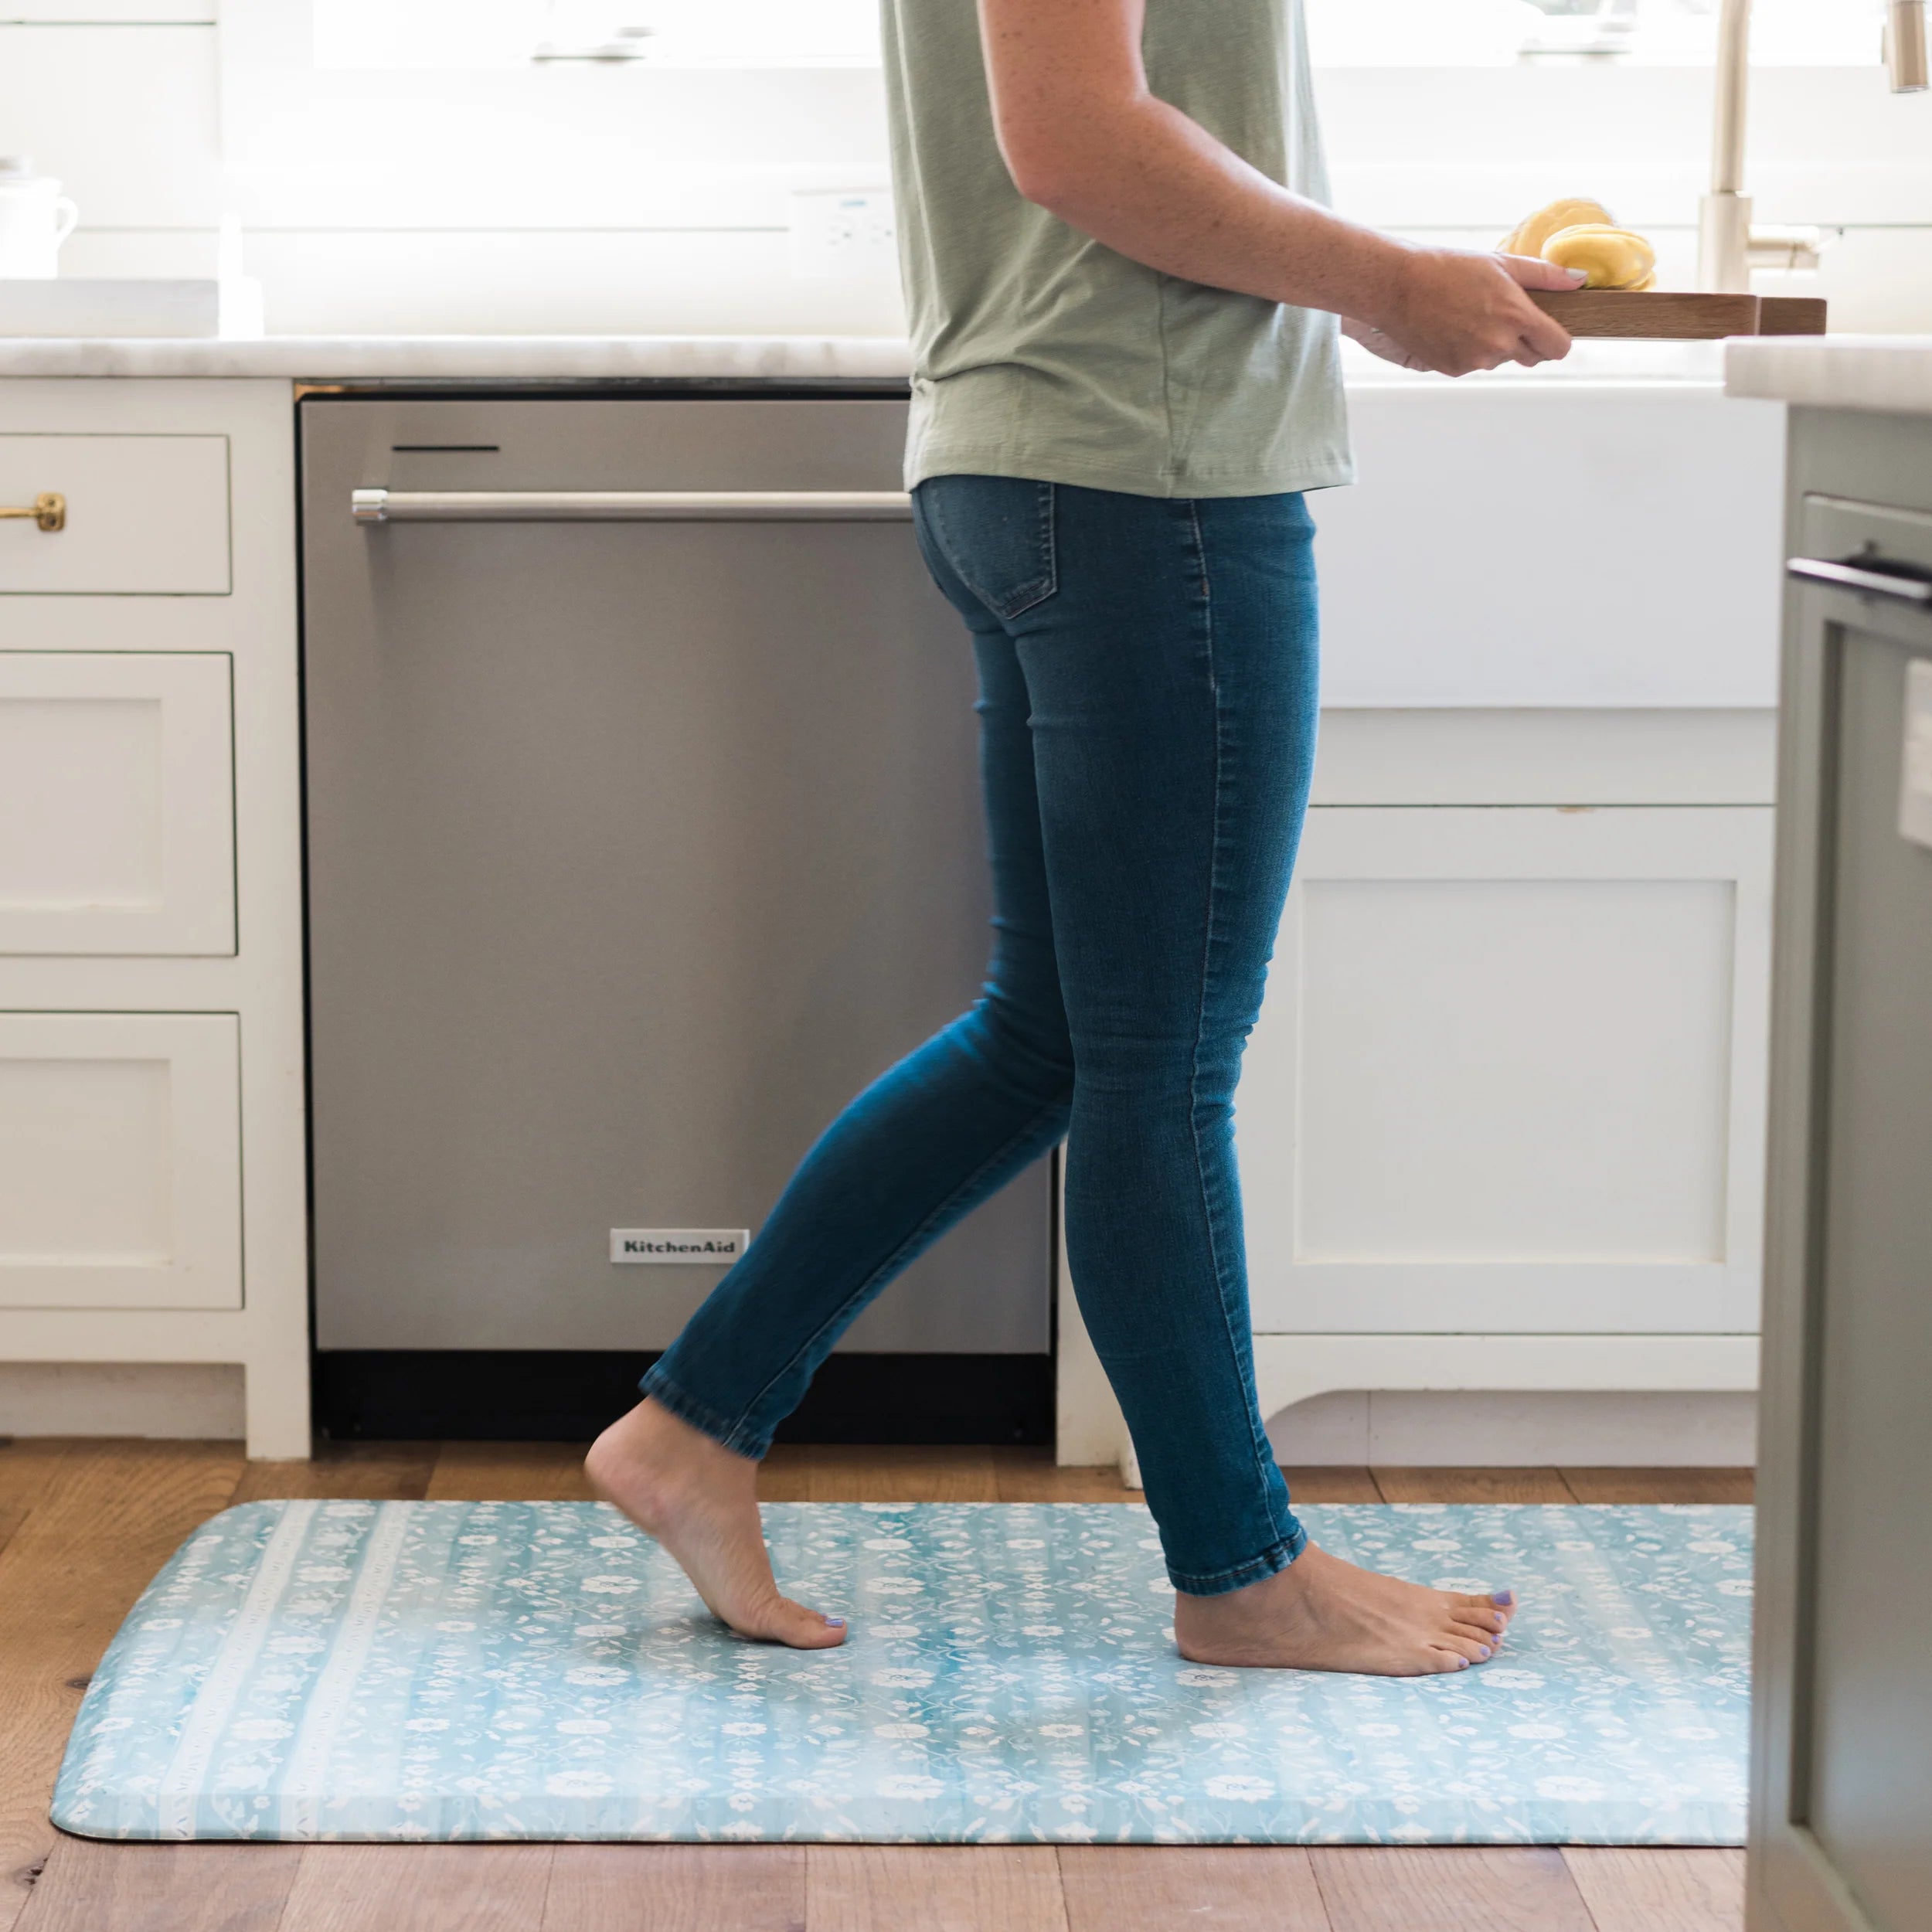 Nama standing mat Gemma Sea blue in kitchen with woman shown in size 30x108